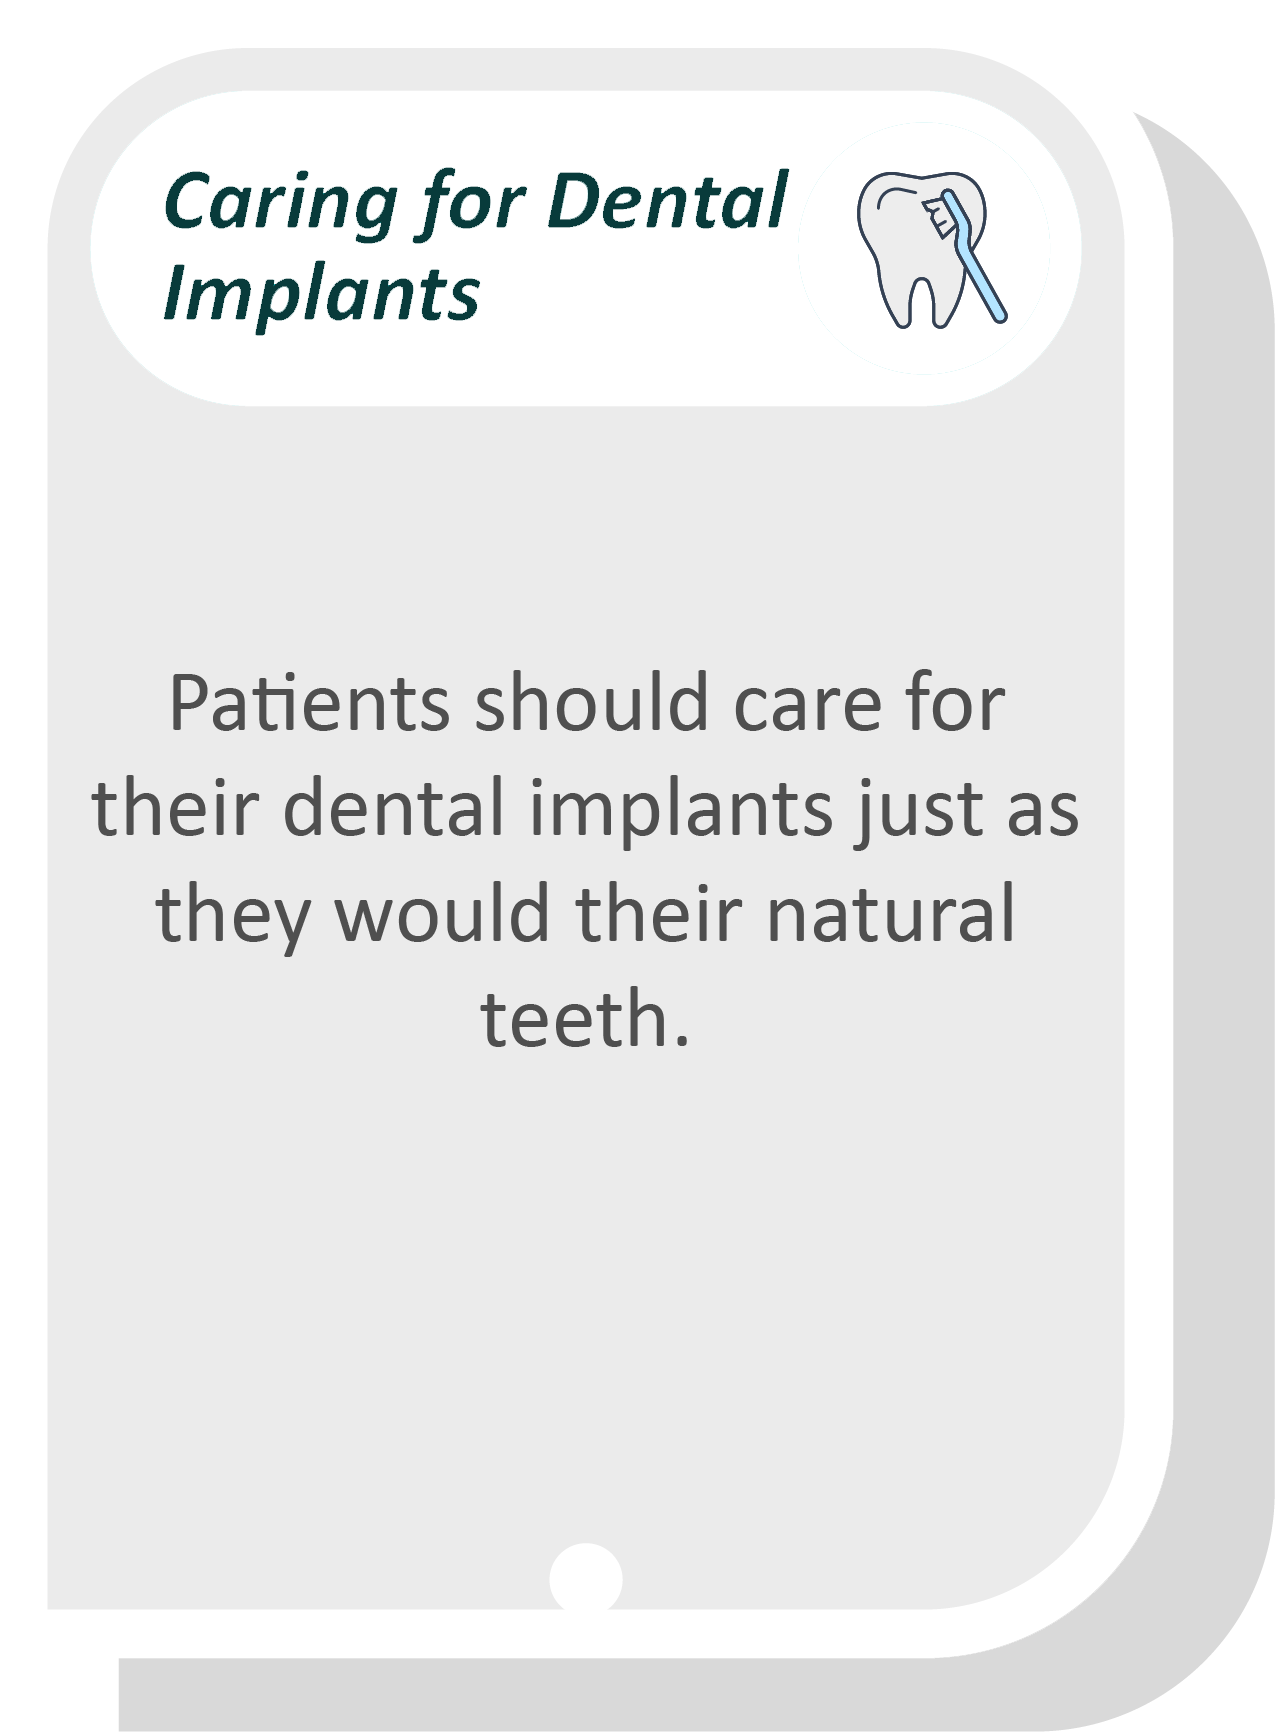 Dental implants infographic: Patients should care for their dental implants just as they would their natural teeth.